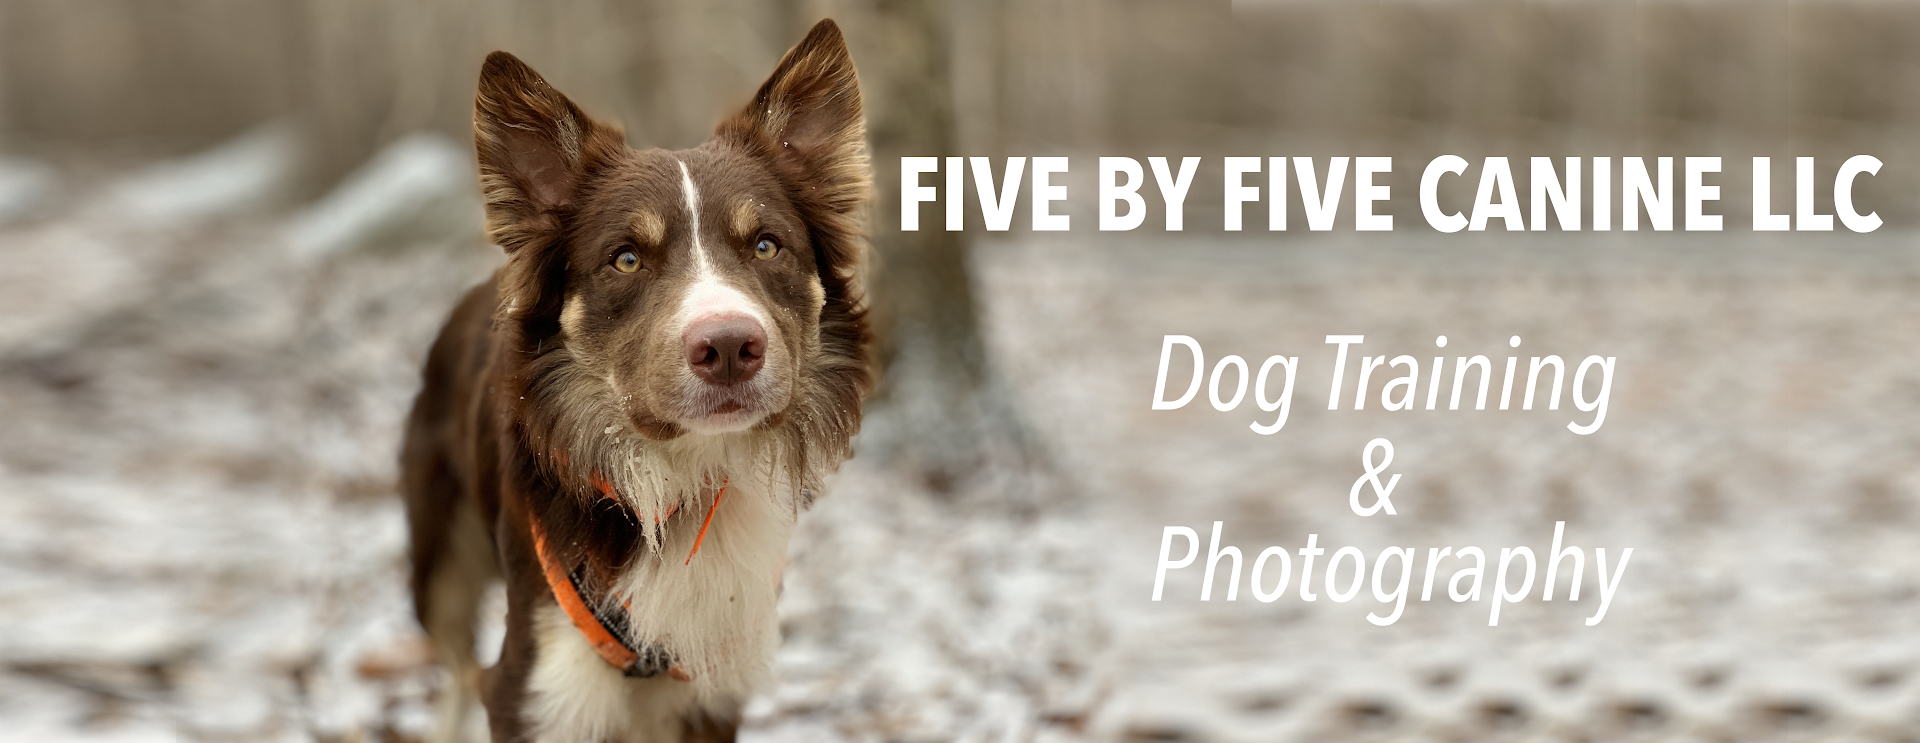 Five By Five Canine LLC